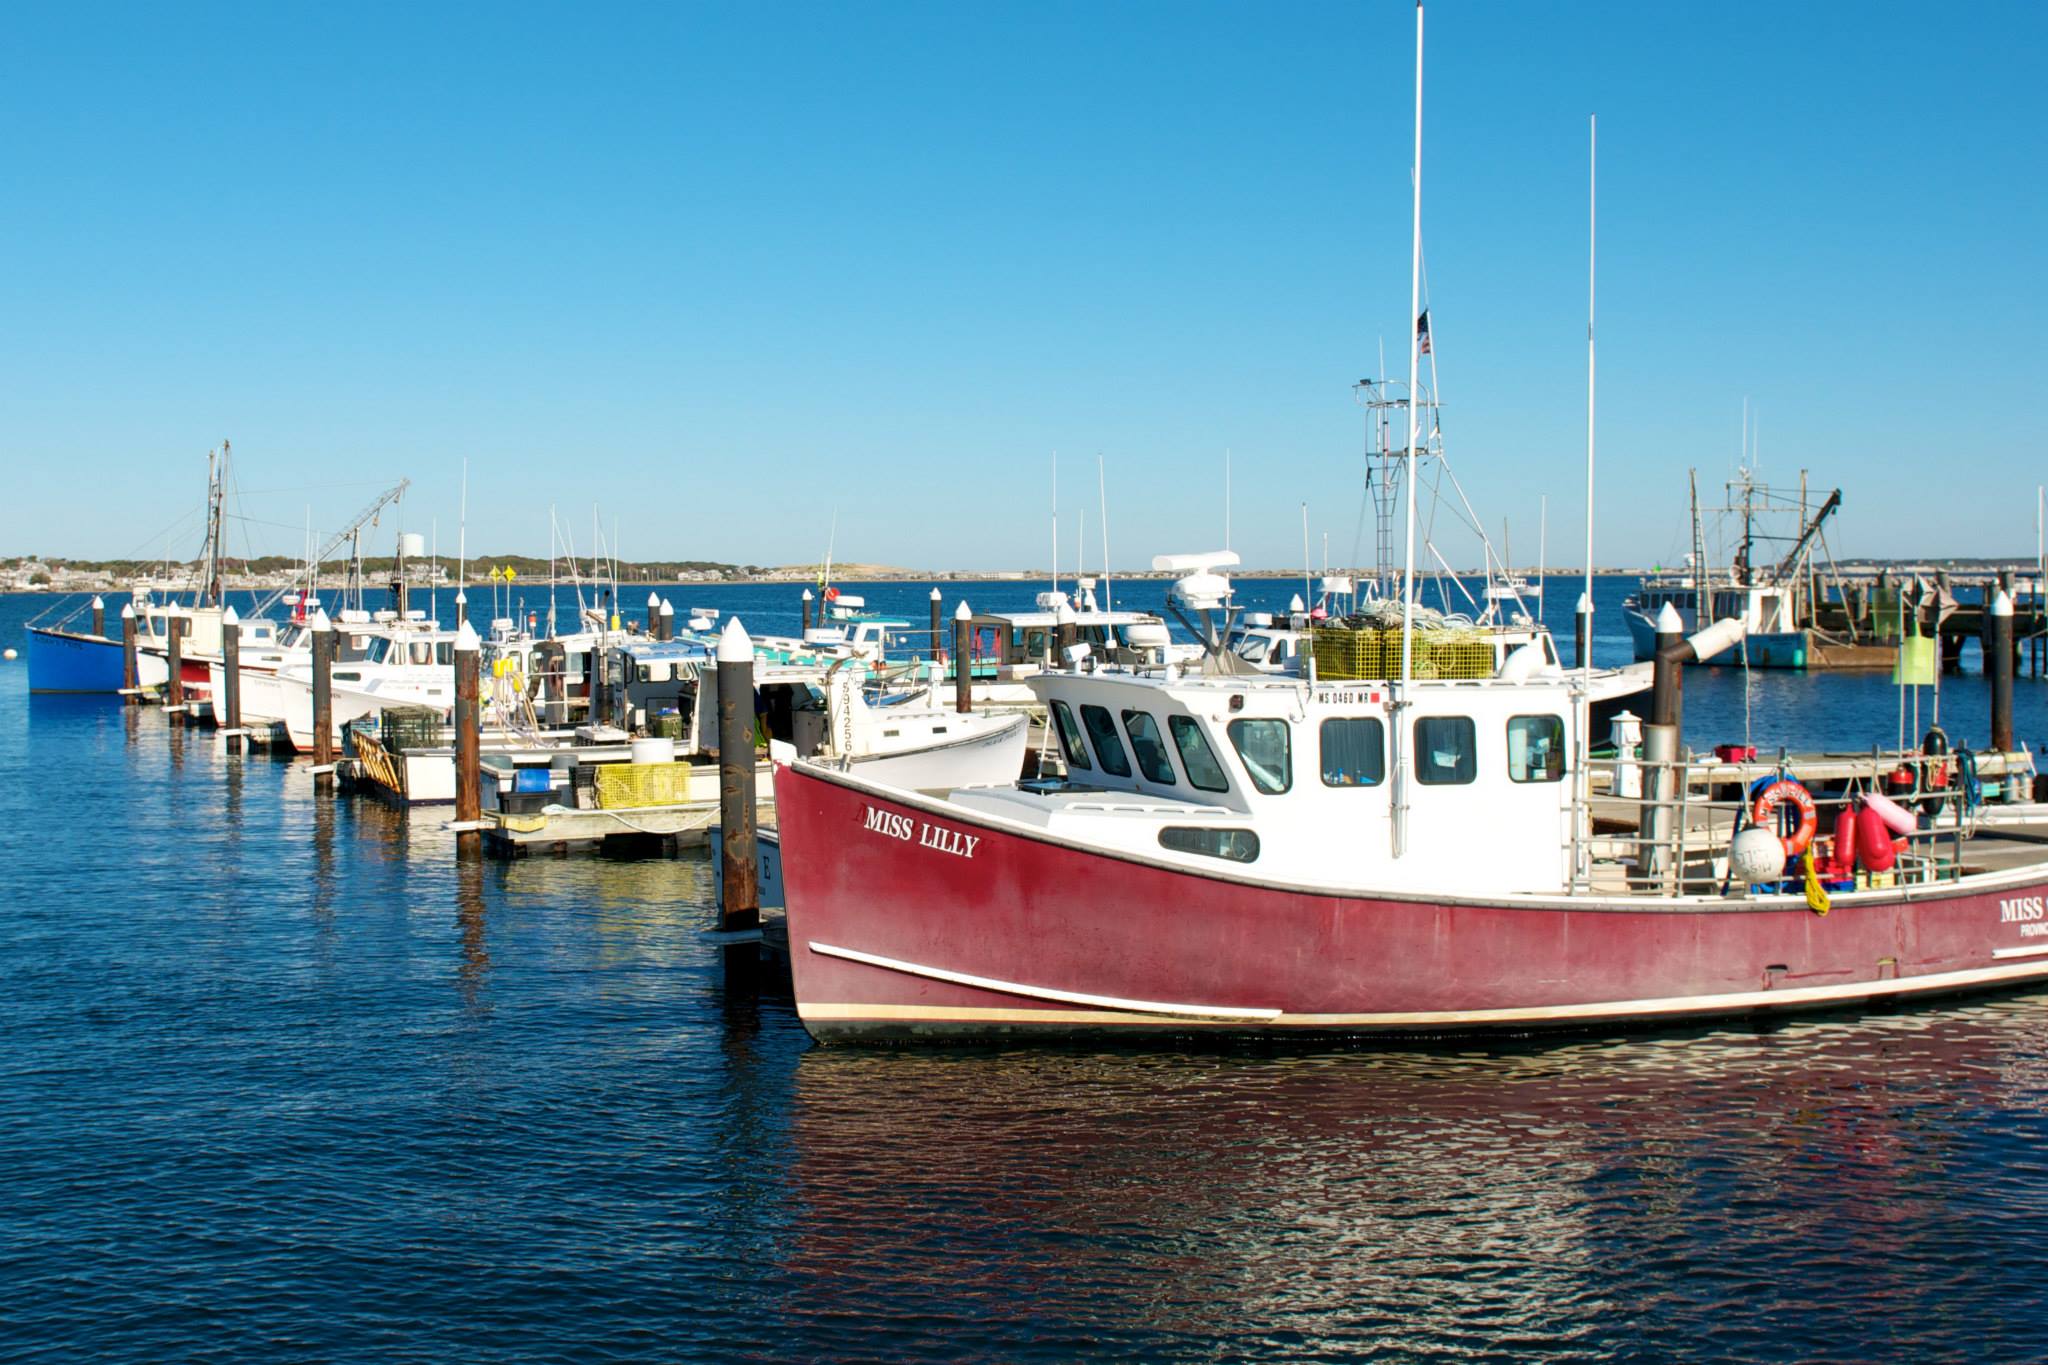 Boats docked on a pier in Provincetown